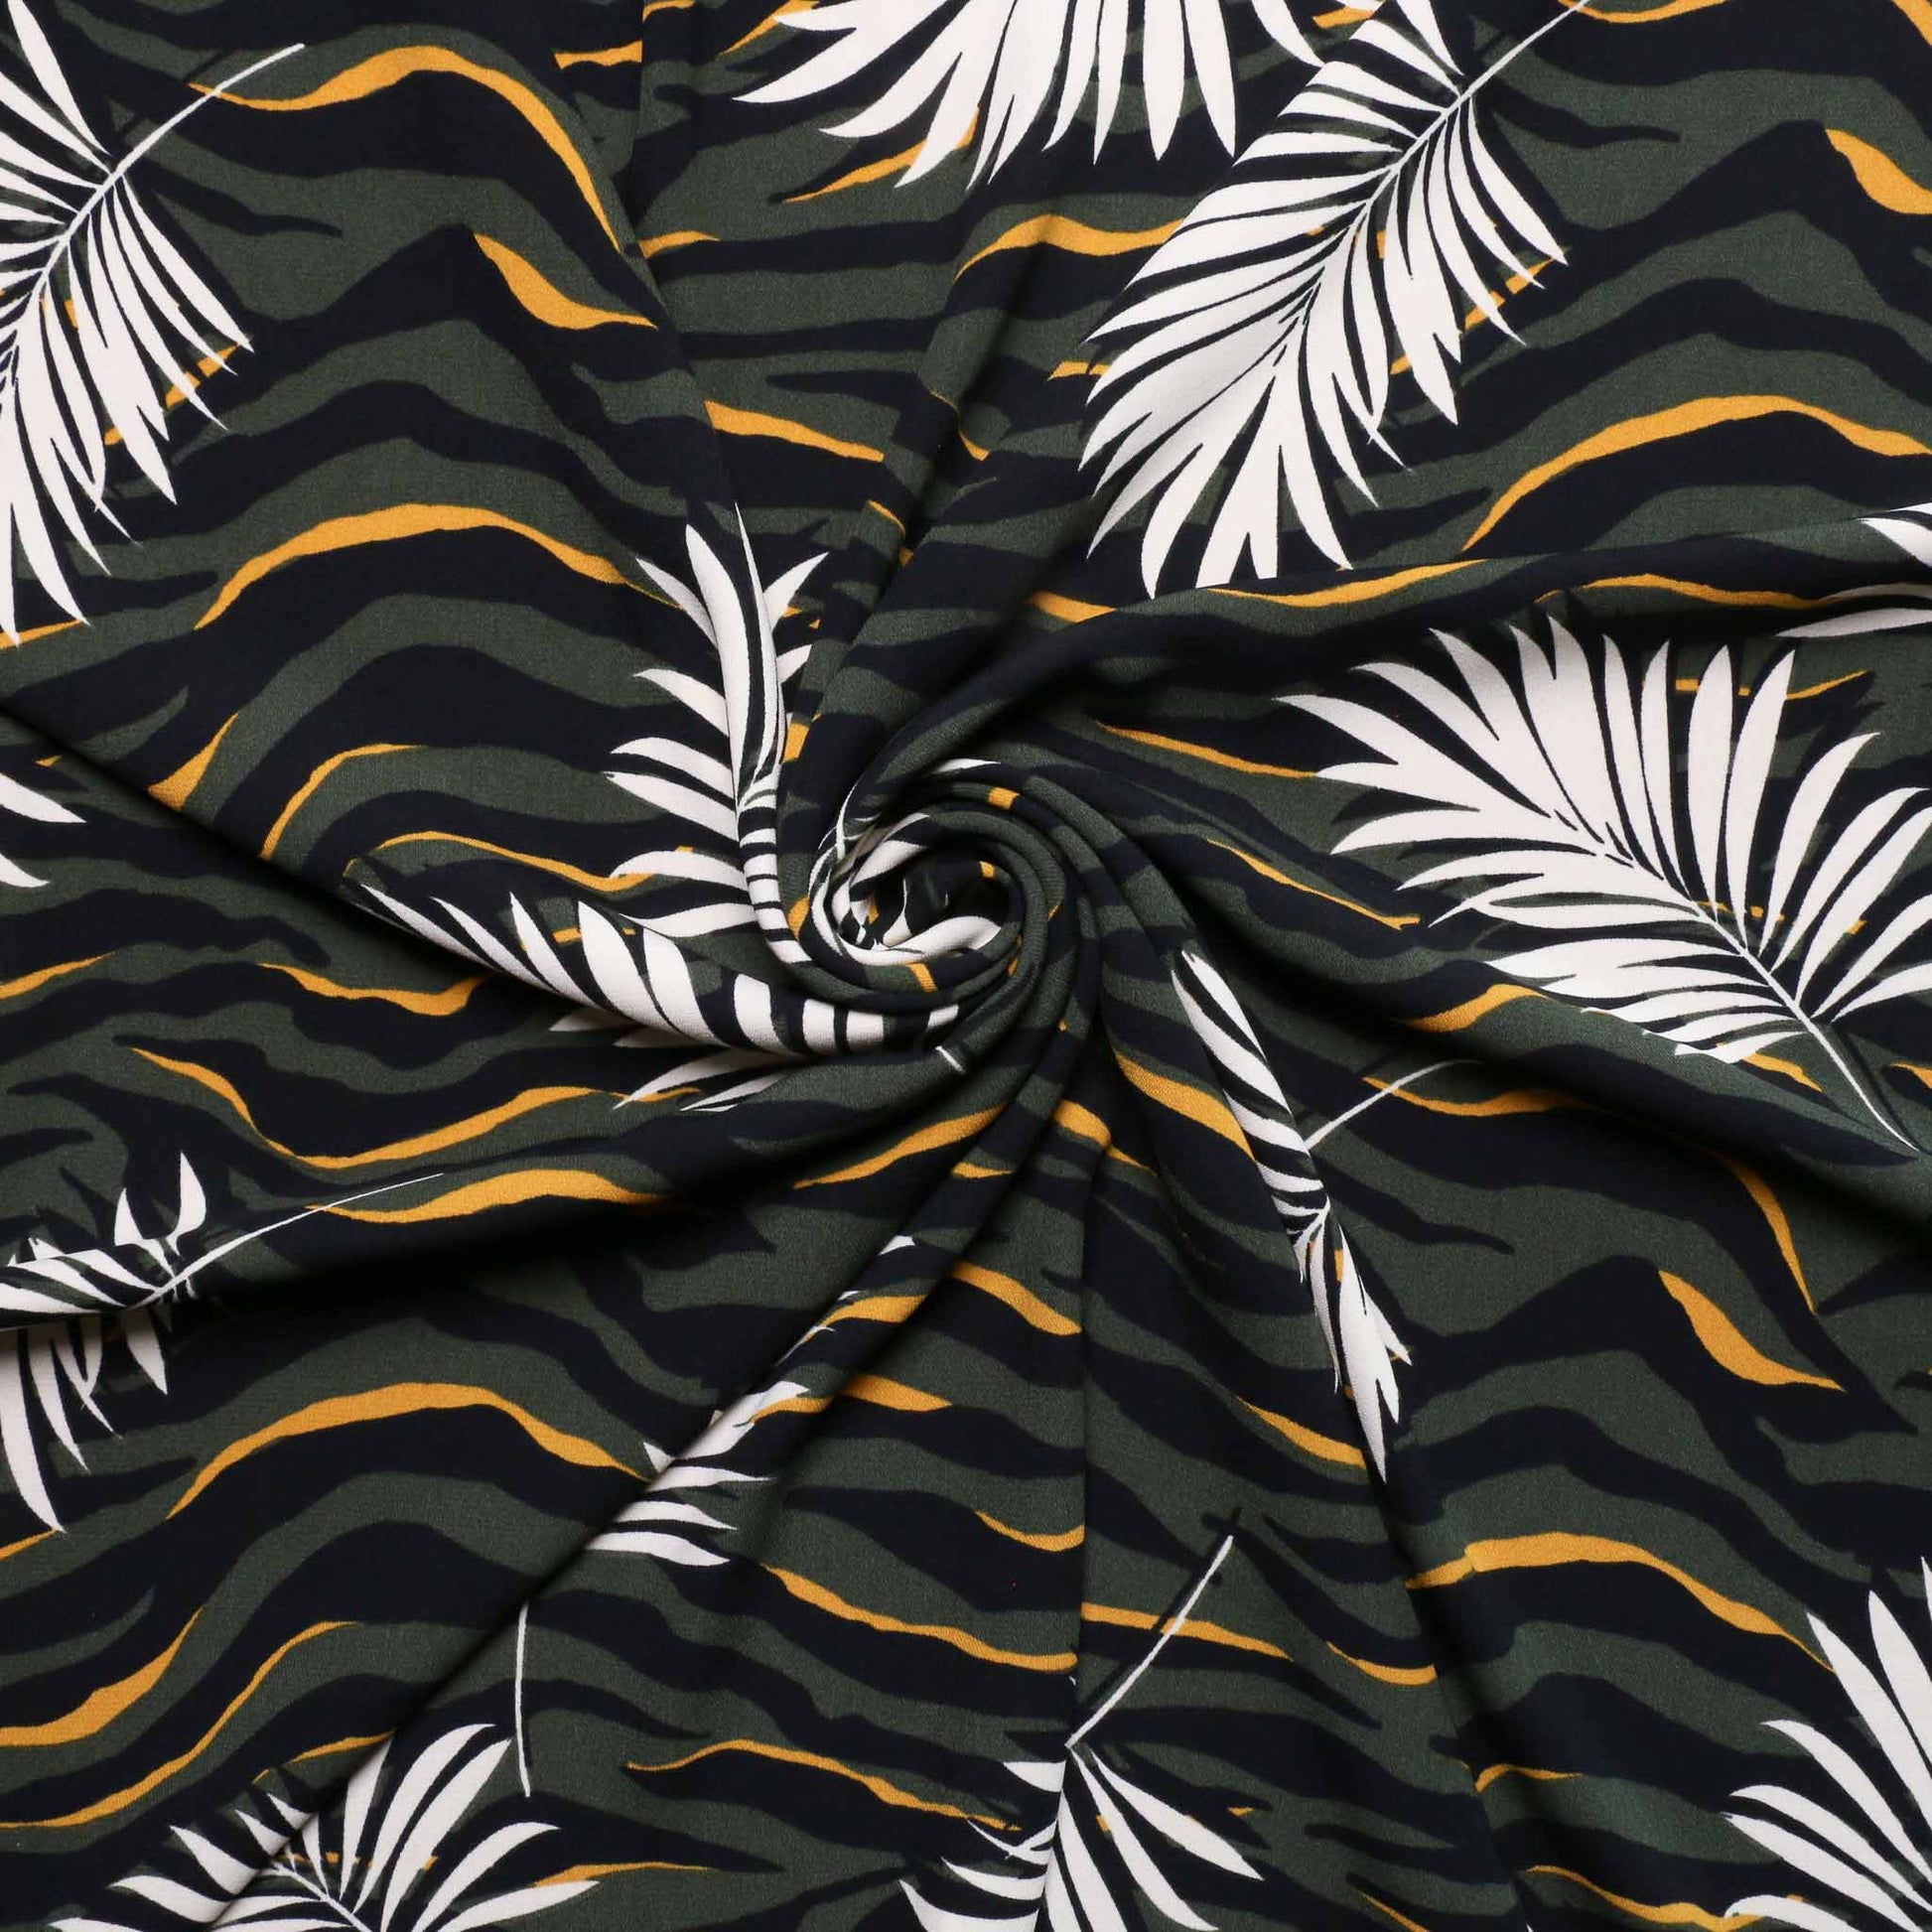 challis dressmaking fabric with zebra print and tropical leaf design in khaki and yellow colours